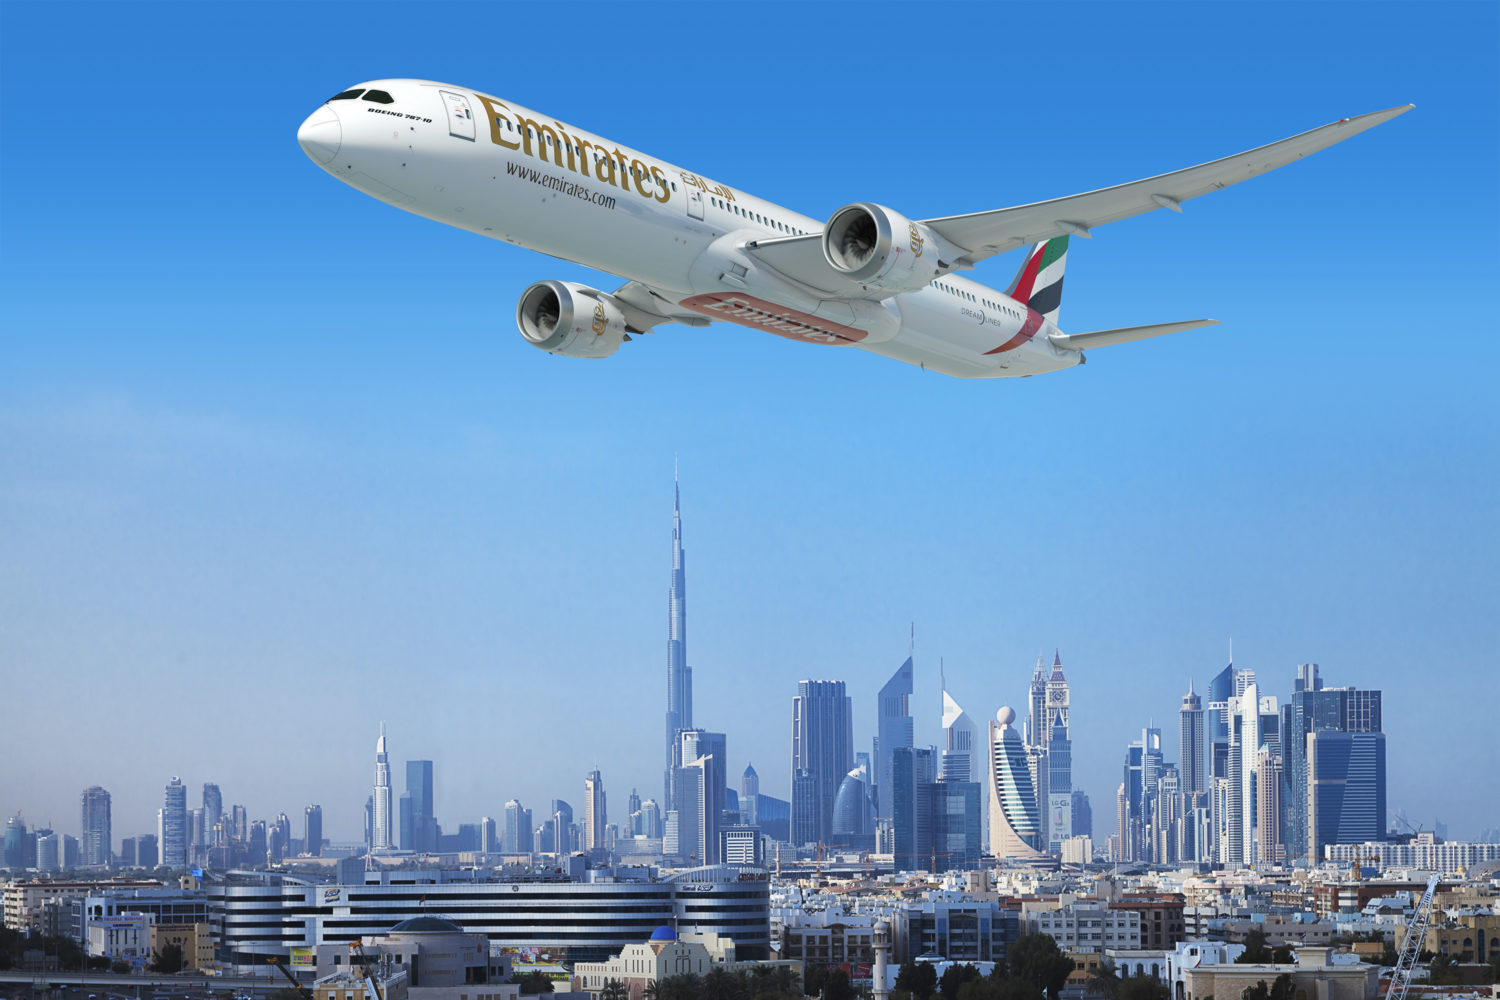 Emirates discussing future of A380 order with Airbus